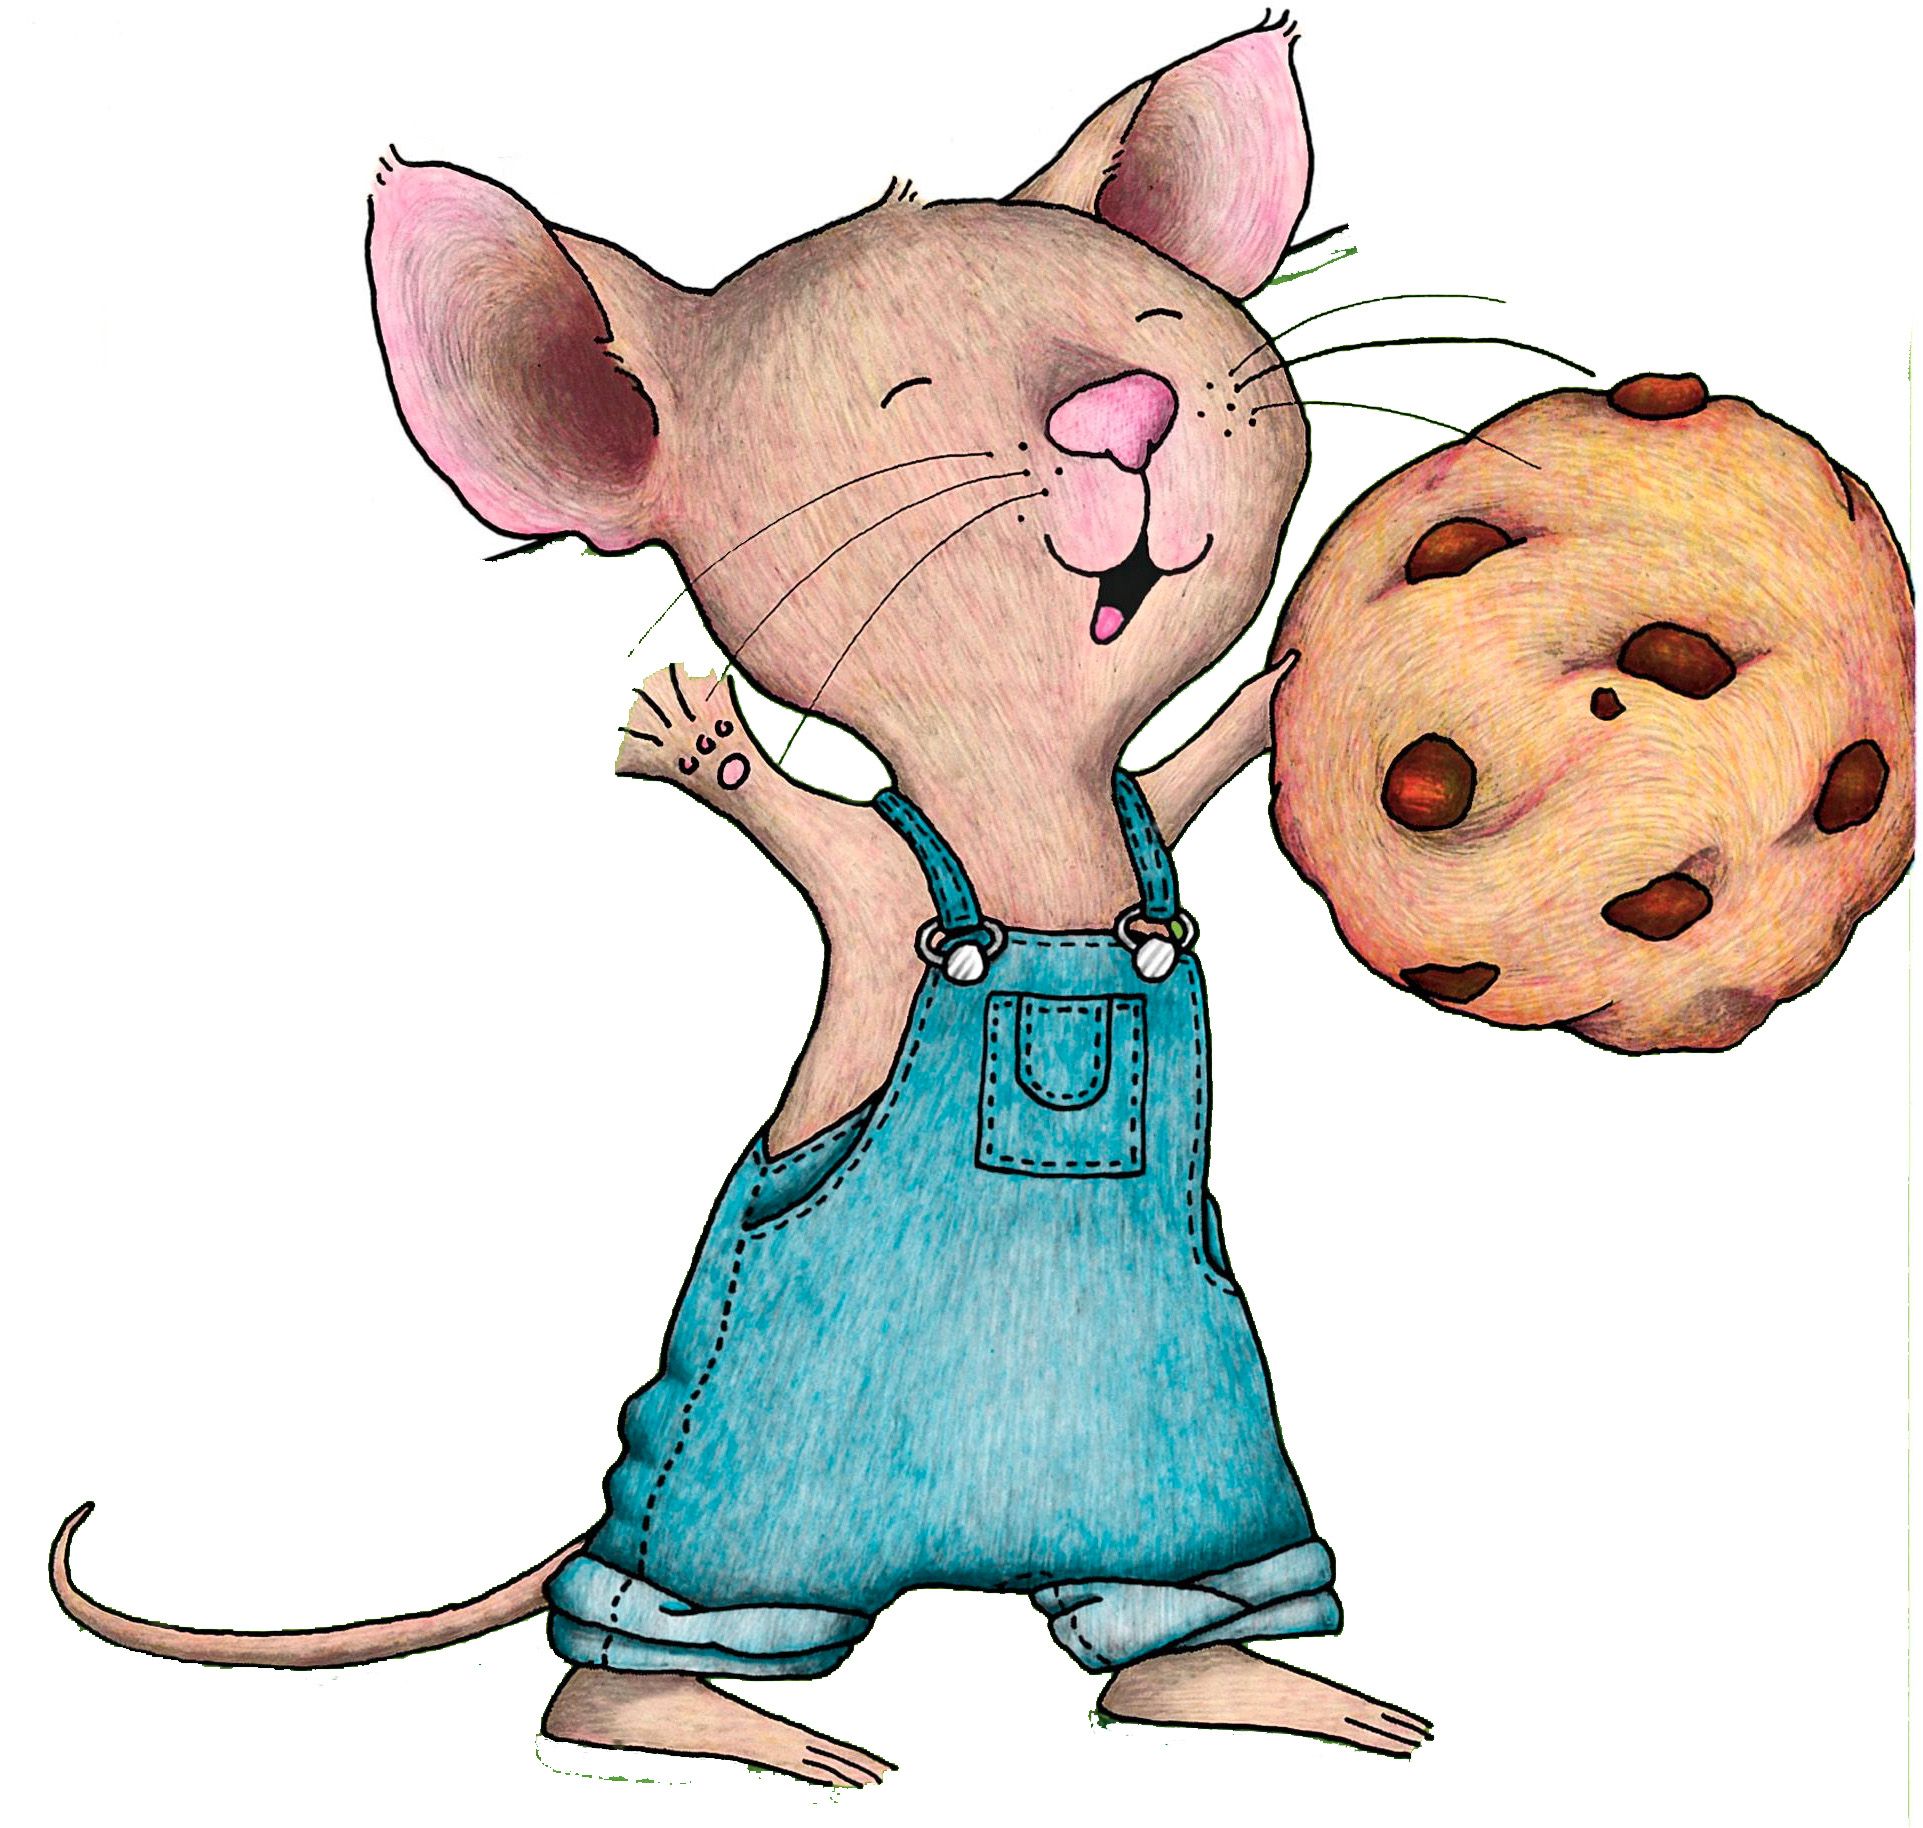 If you give a mouse a cookie illustration